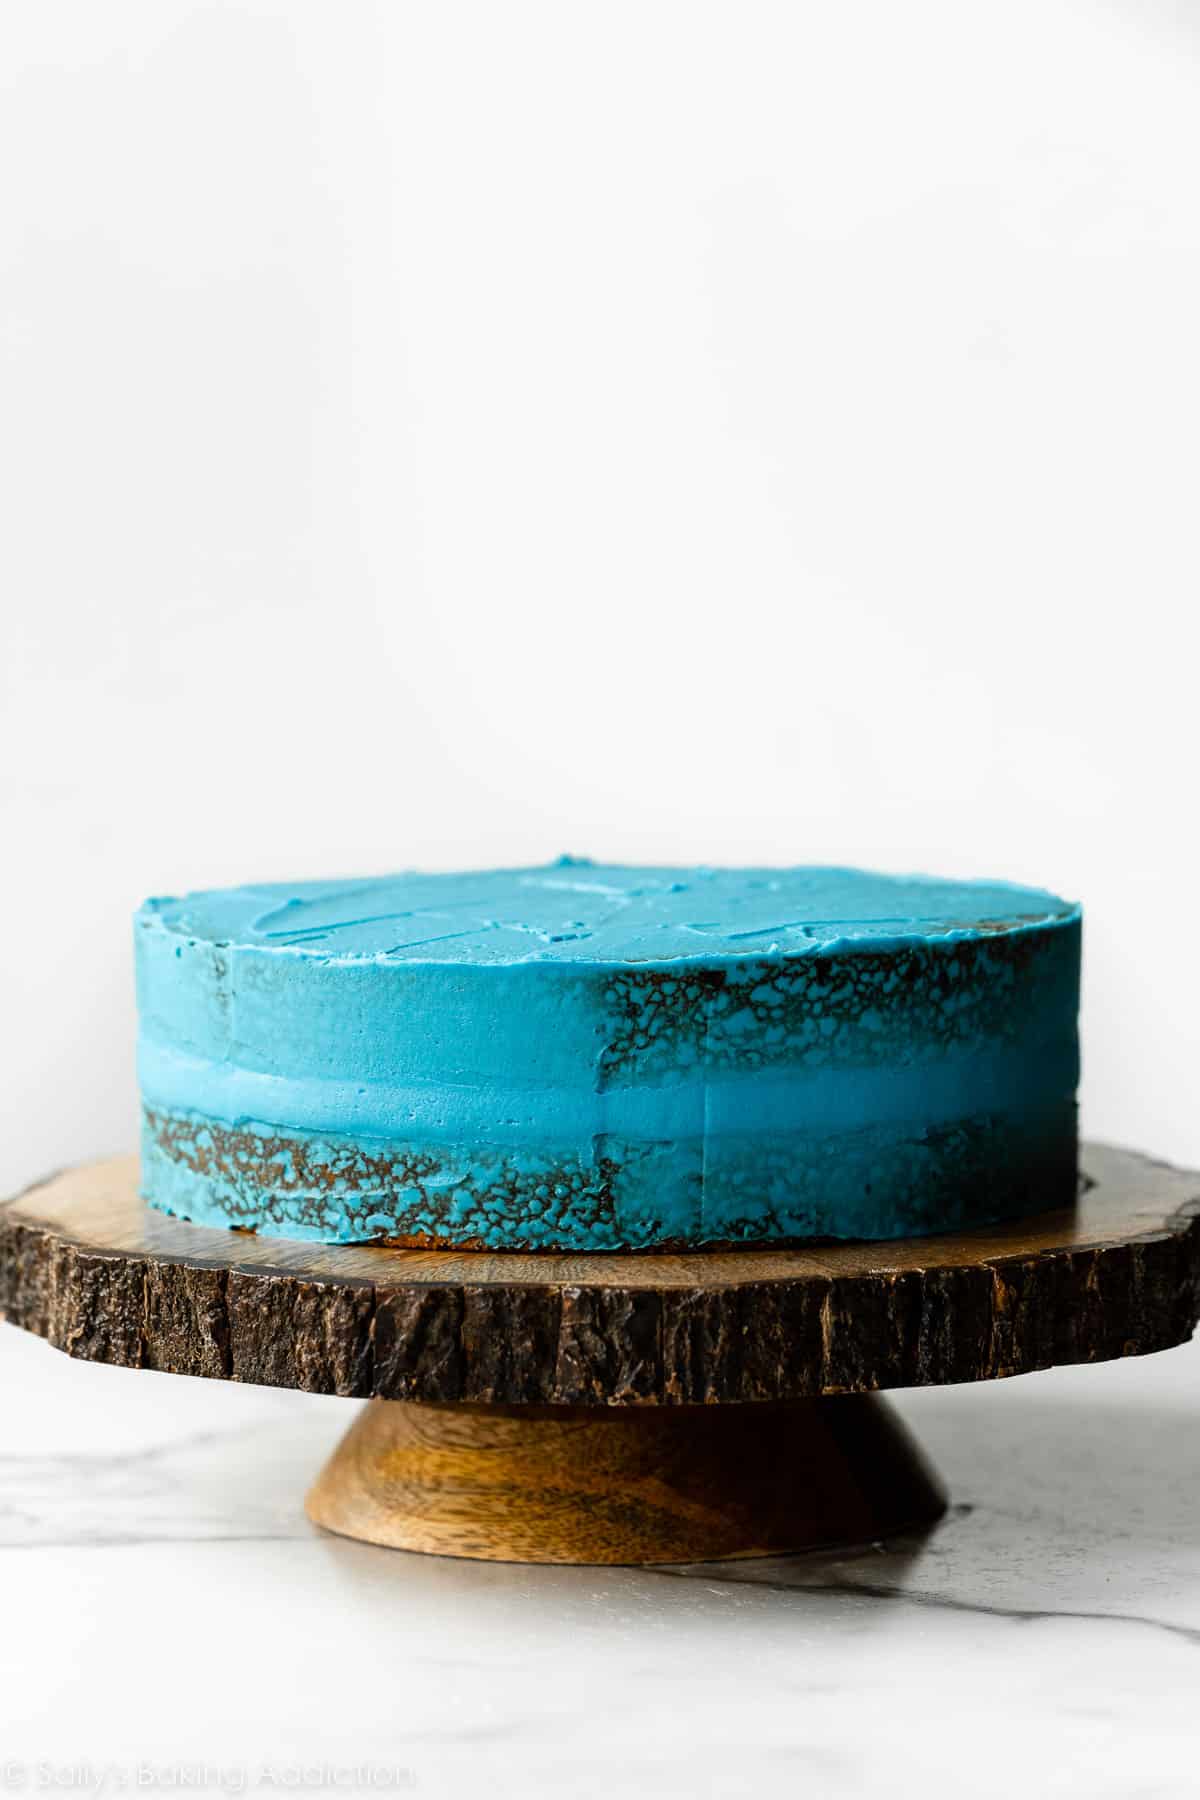 blue crumb coated cake on wooden cake stand.